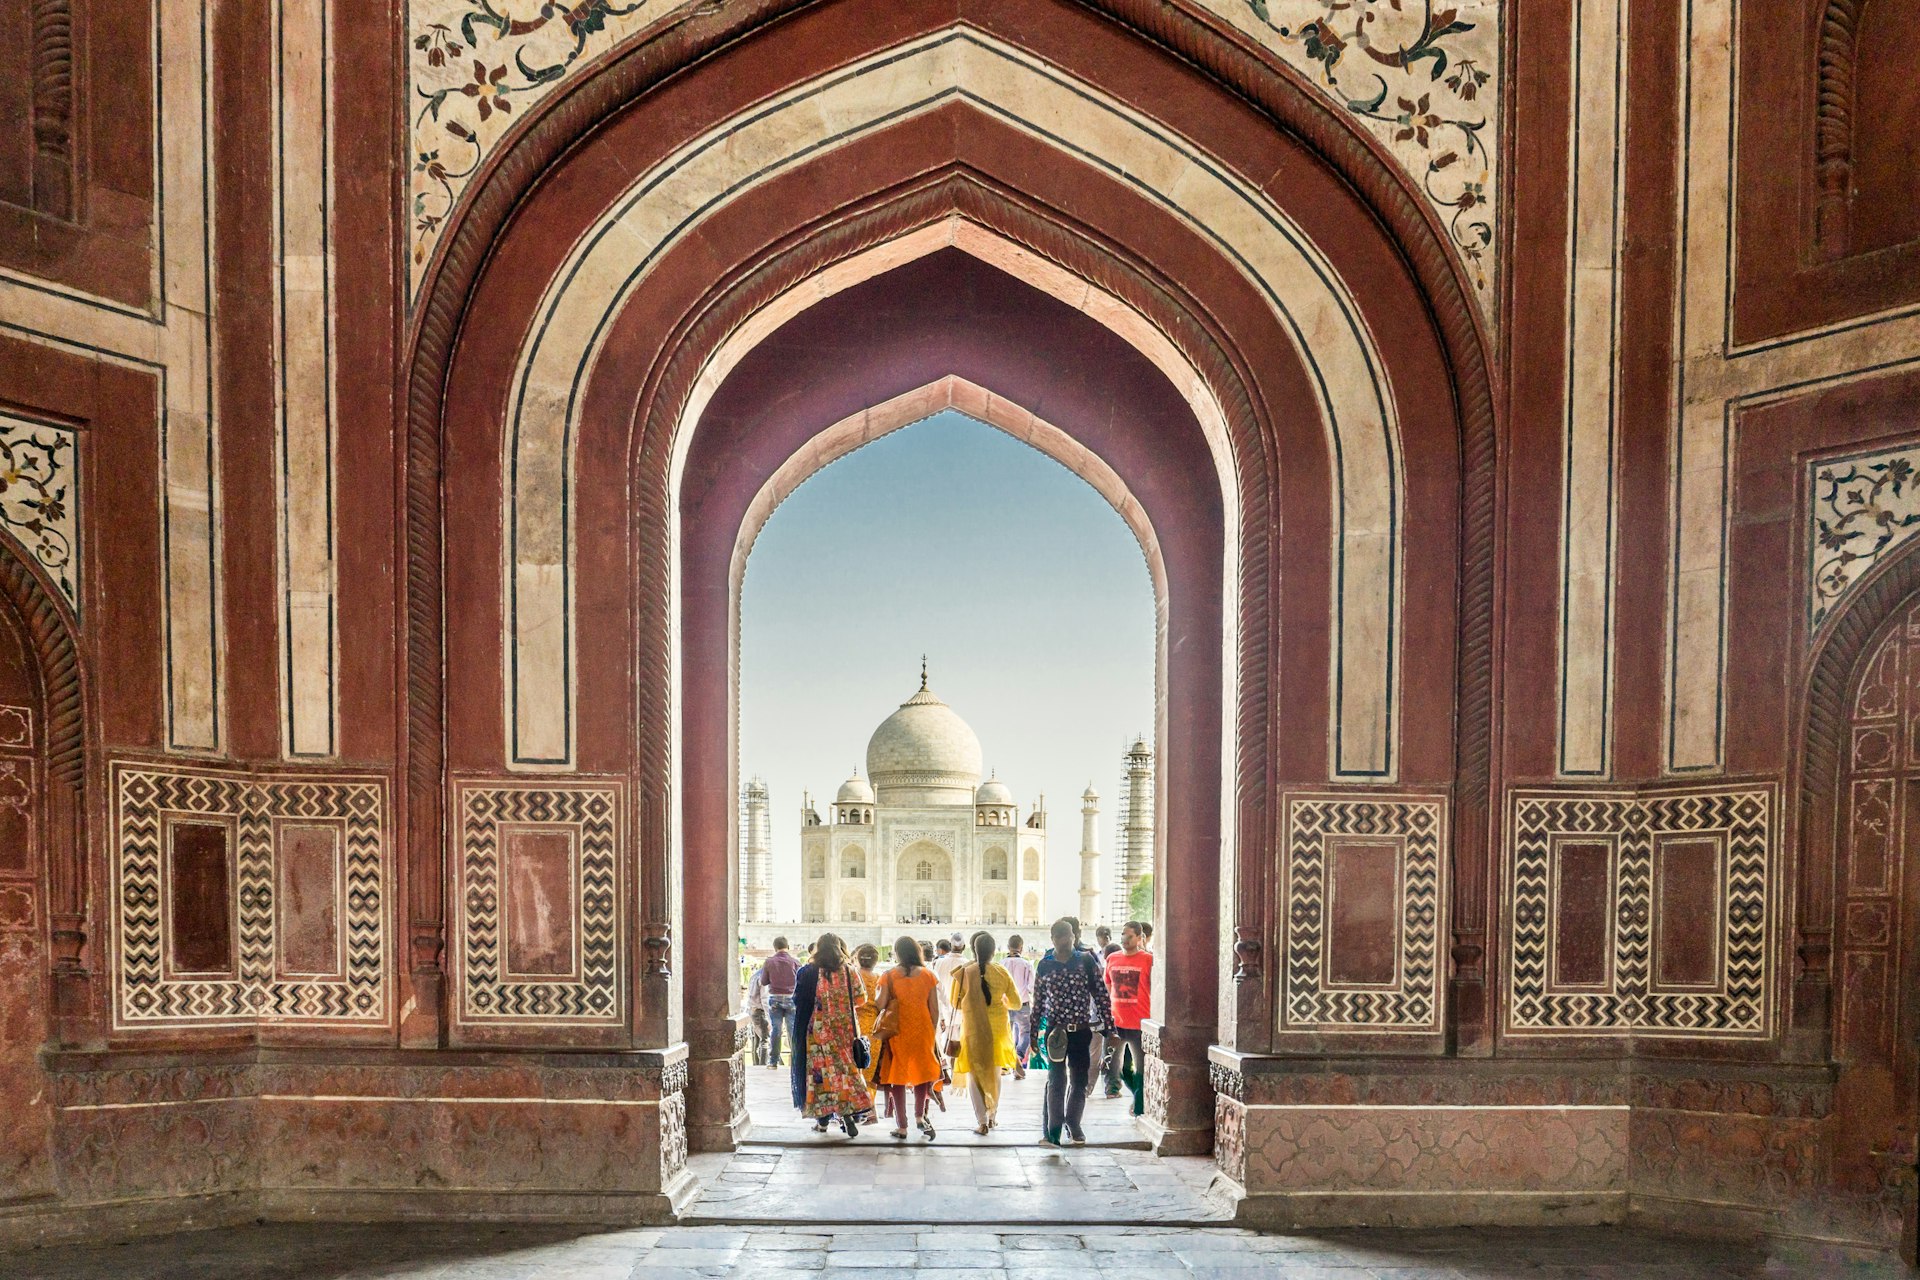 The Taj Mahal as viewed through the doorway of the main gate, which frames the building neatly. Crowds walk towards the white marble structure, which has a domed roof and four pillars surrounding it.